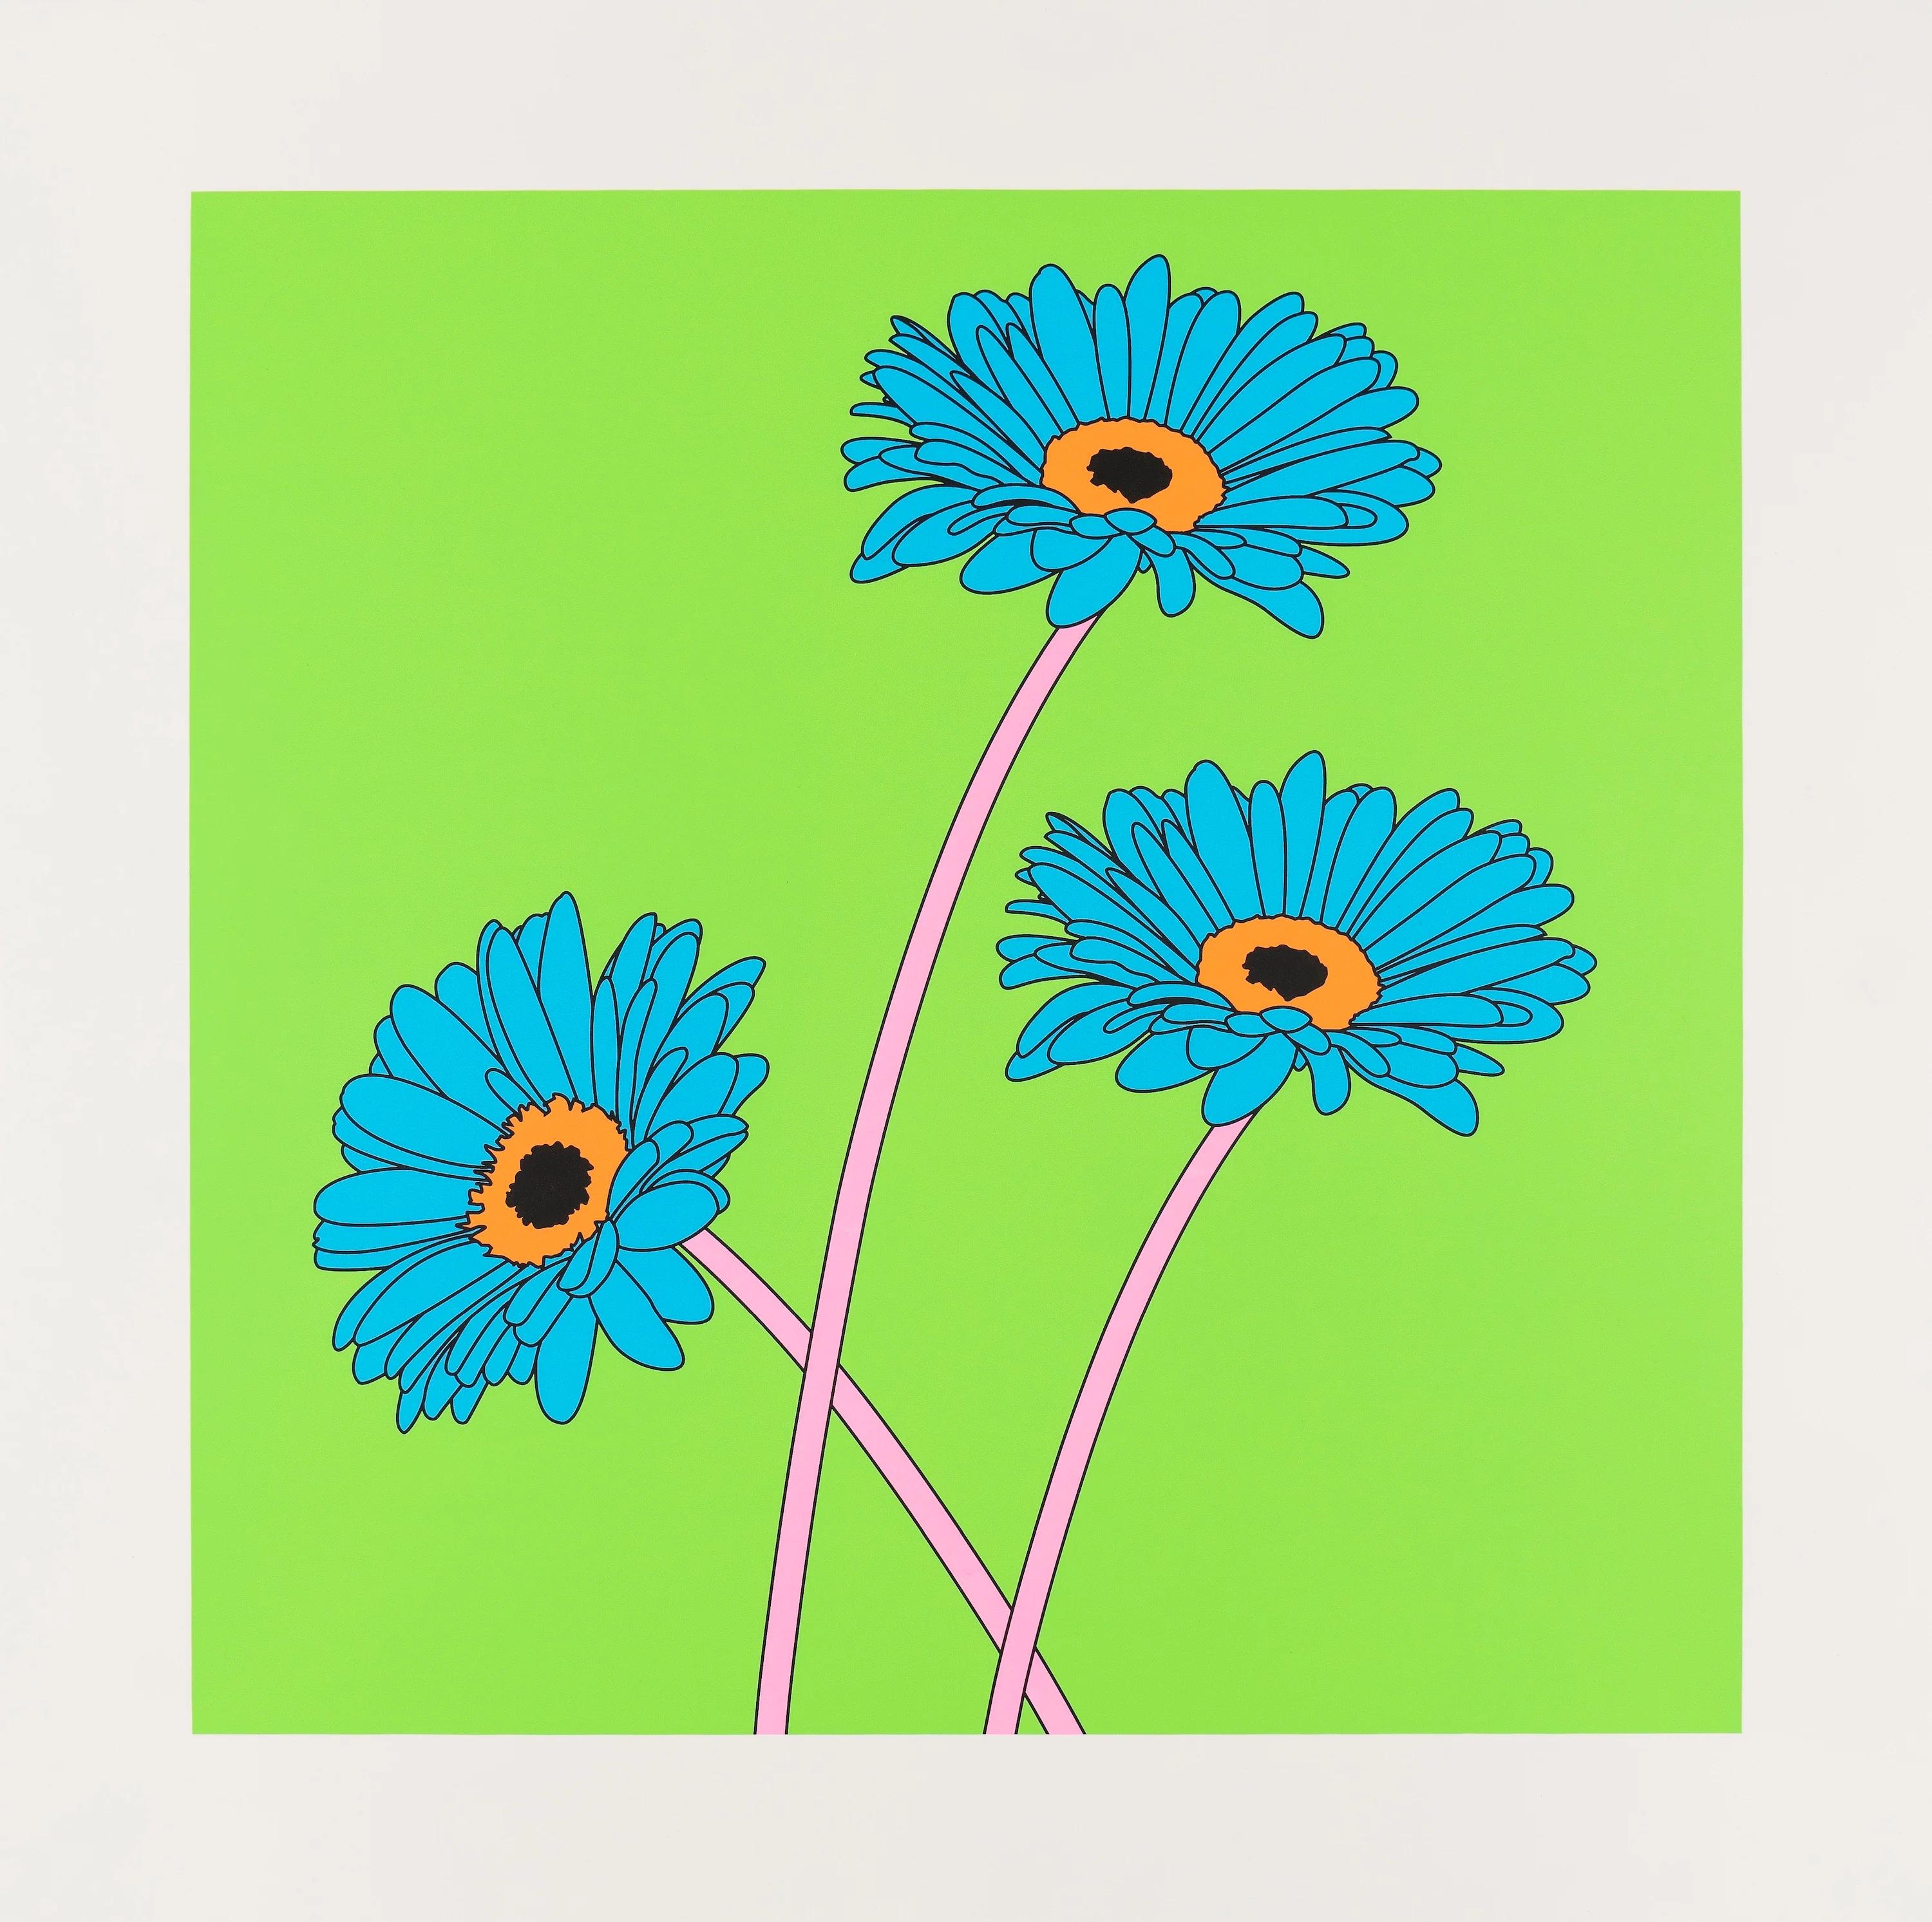 Gerberas, 2020
Michael Craig-Martin

Screenprint in colours, on Arches 88 paper,
Signed, dated and numbered from the edition of 125
Published by Jealous Gallery, London, unframed. 
From The Help Portfolio
Image: 40 × 40 cm (15.7 × 15.7 in)
Sheet: 50